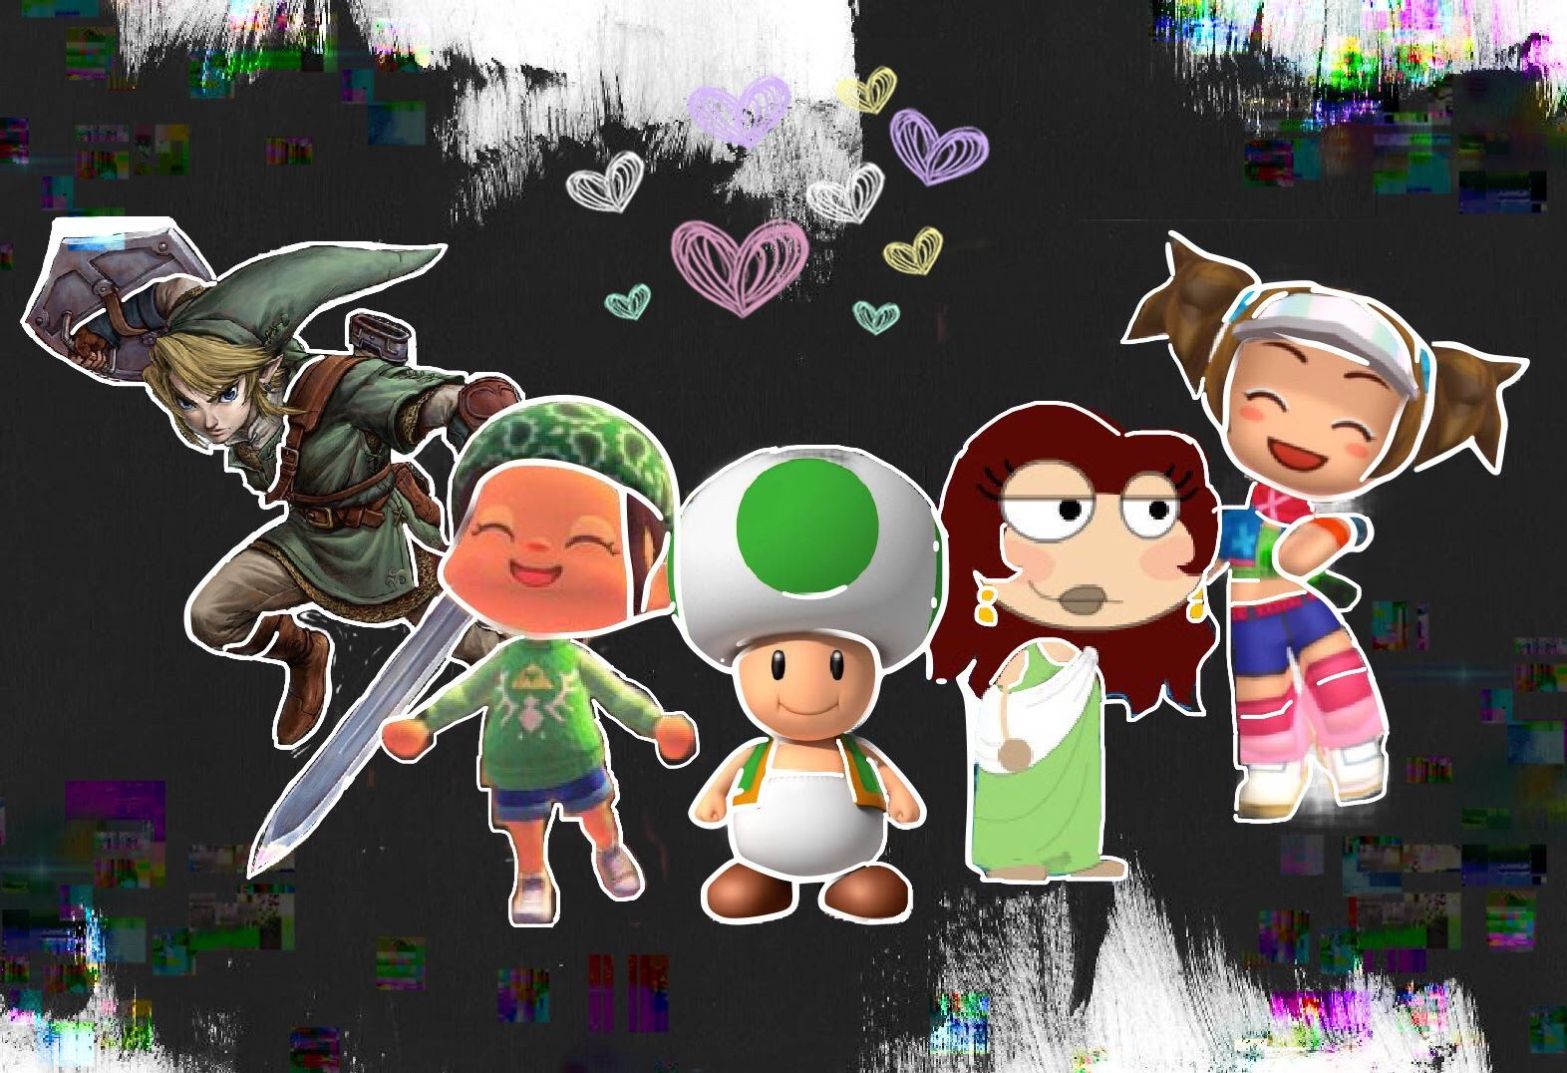 Collage of video game characters, including Poptropica icons, Green Toad and Link